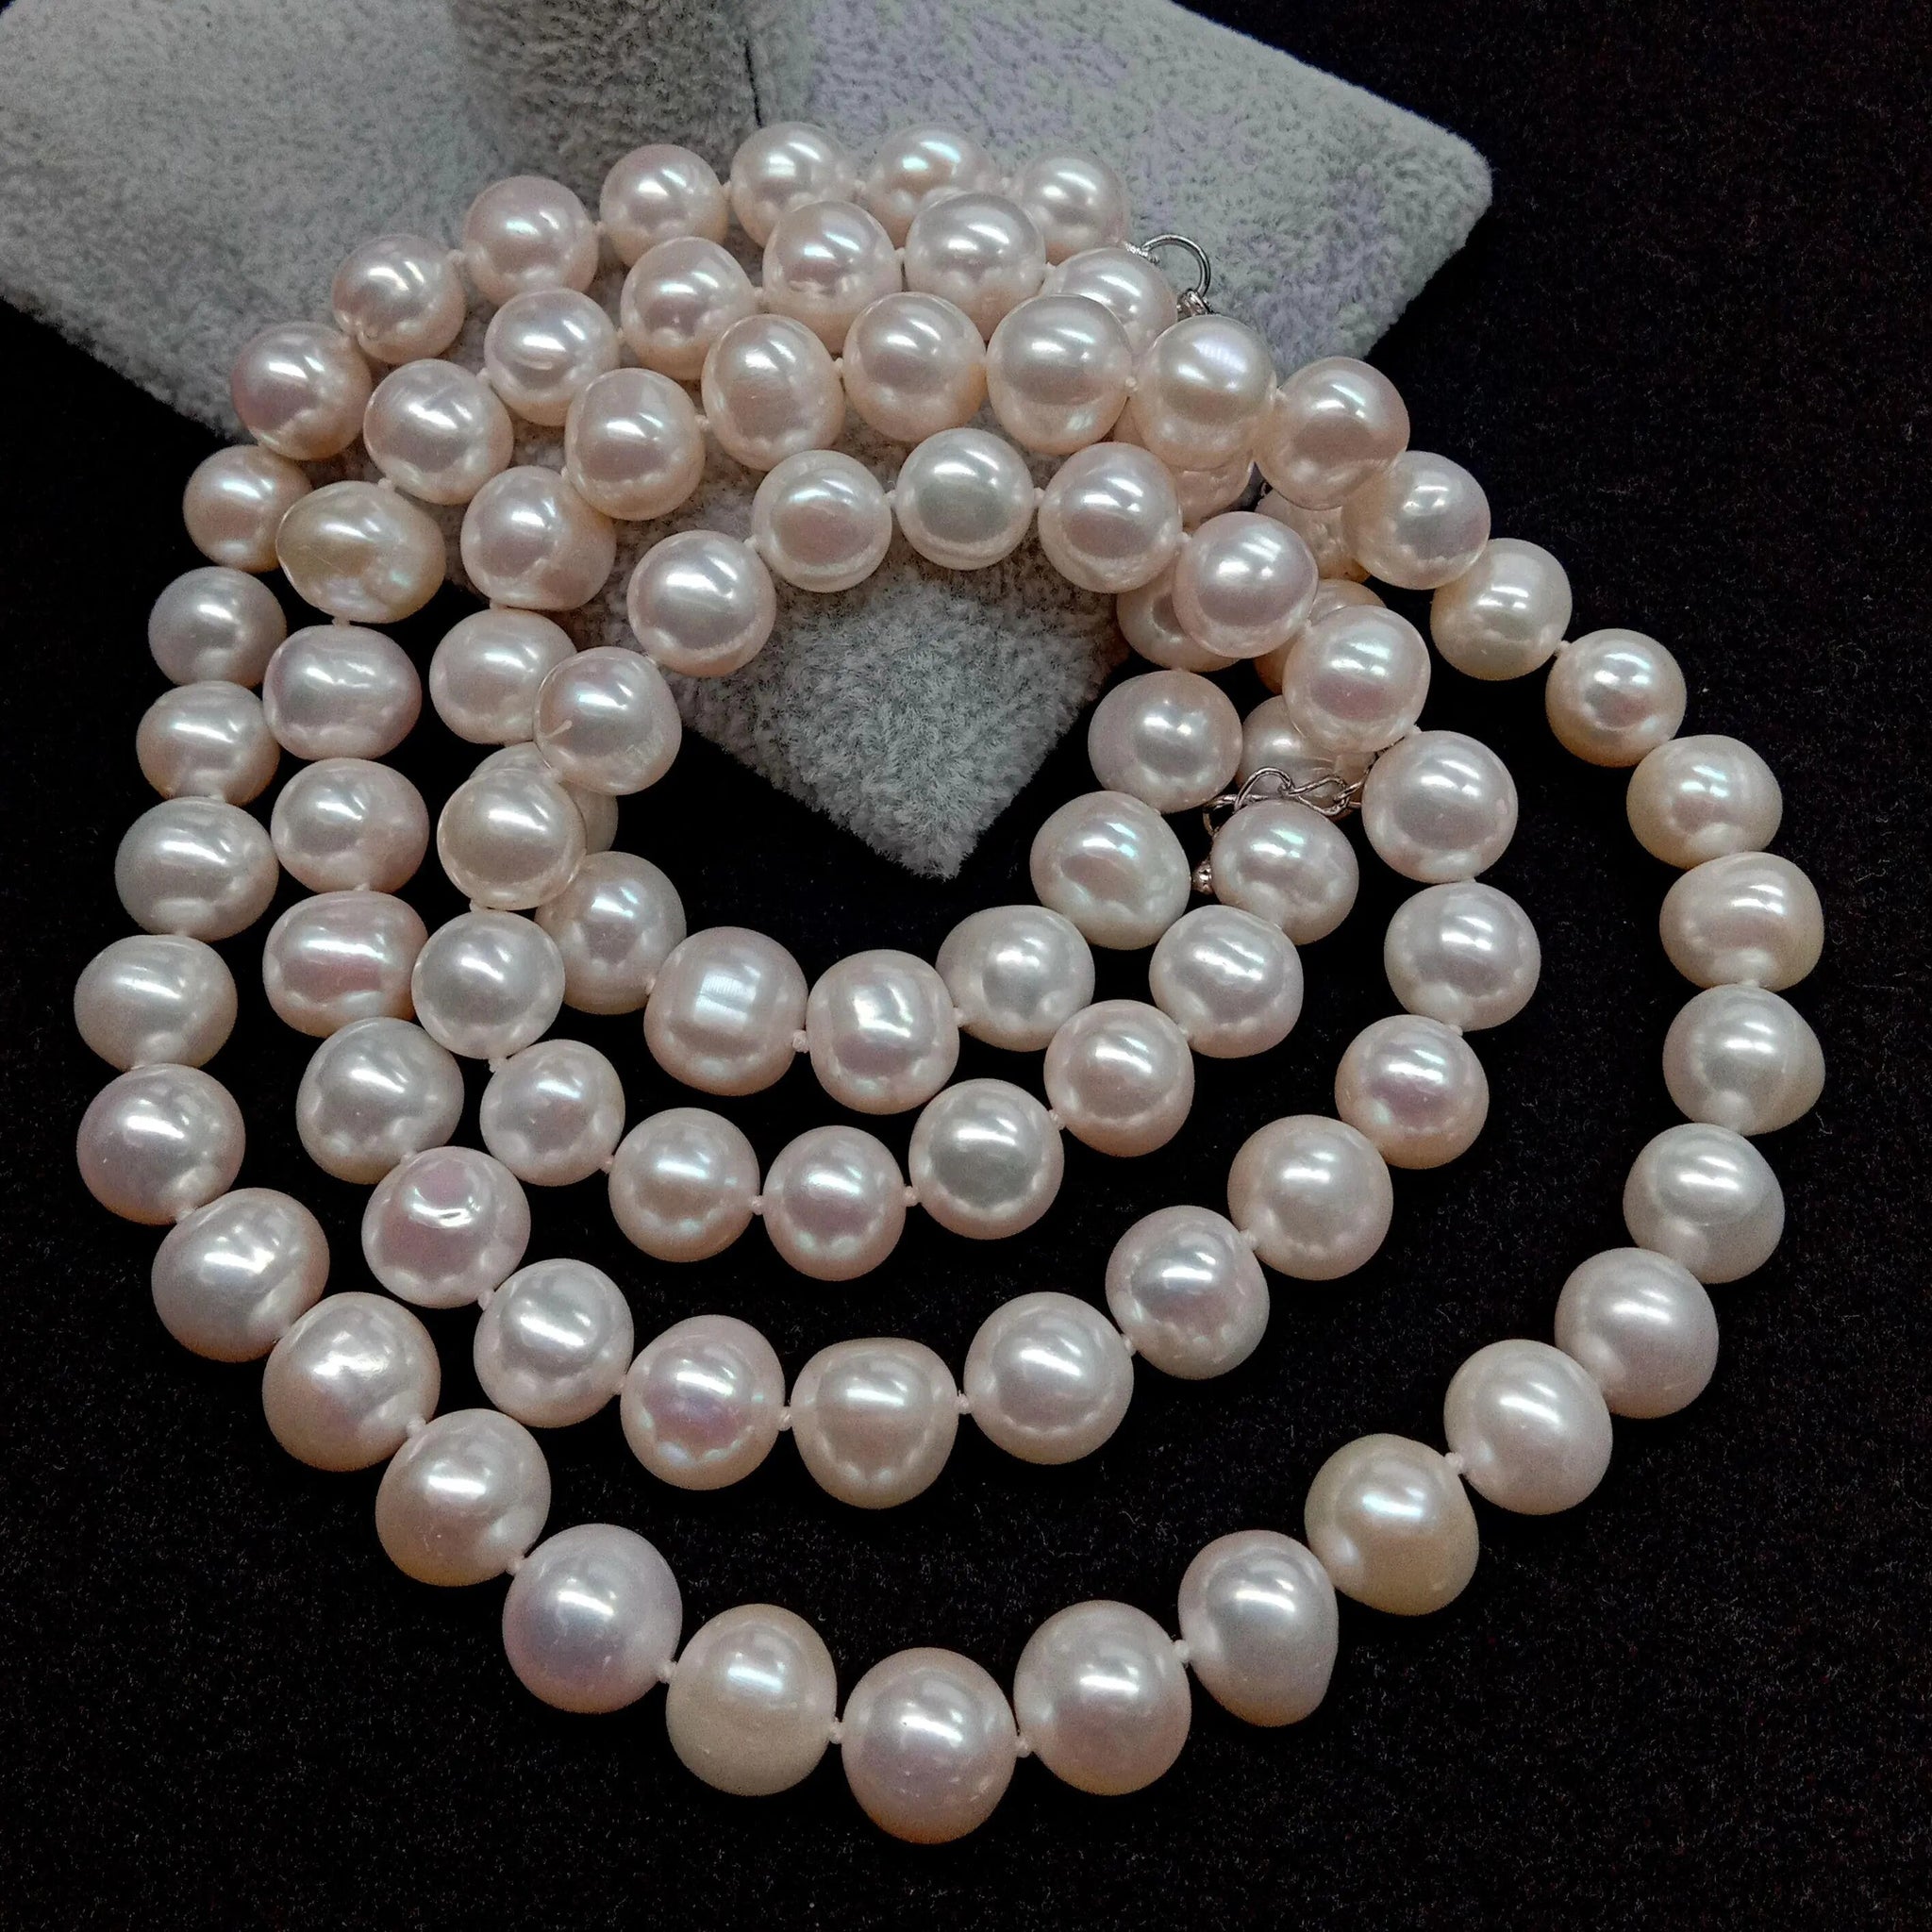 10-11mm Near Round.  White Freshwater Pearl Long Necklace.  Natural Flaws.